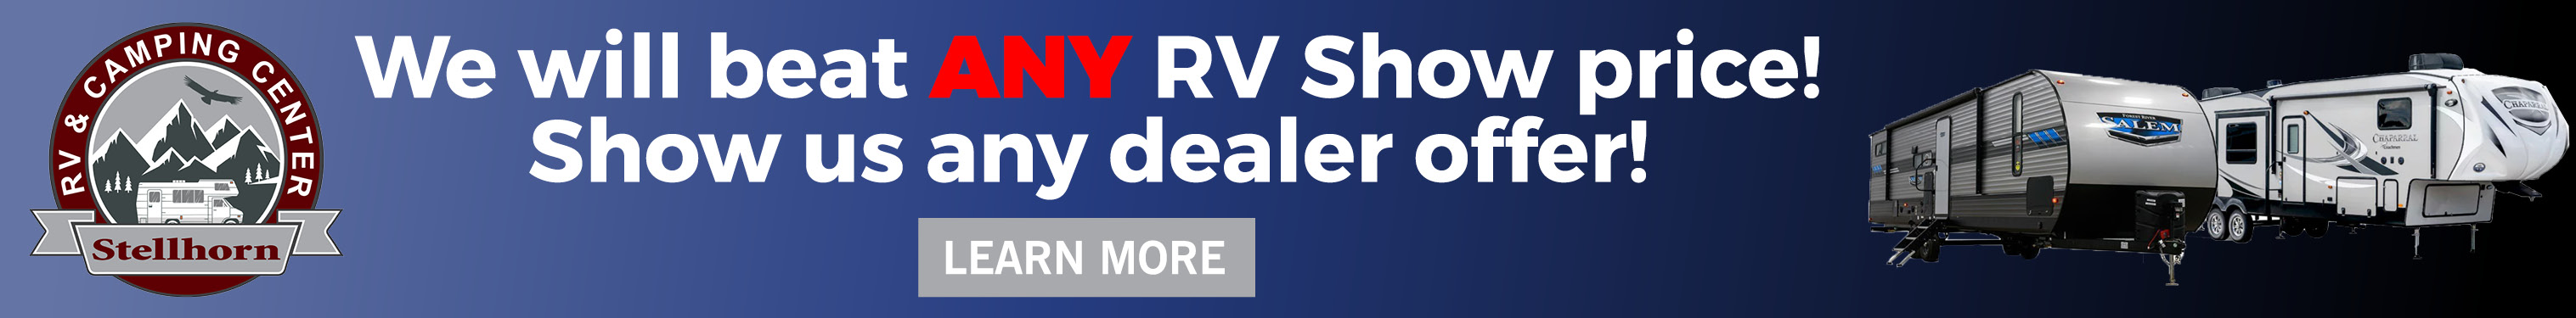 We'll Beat Any RV Show Price